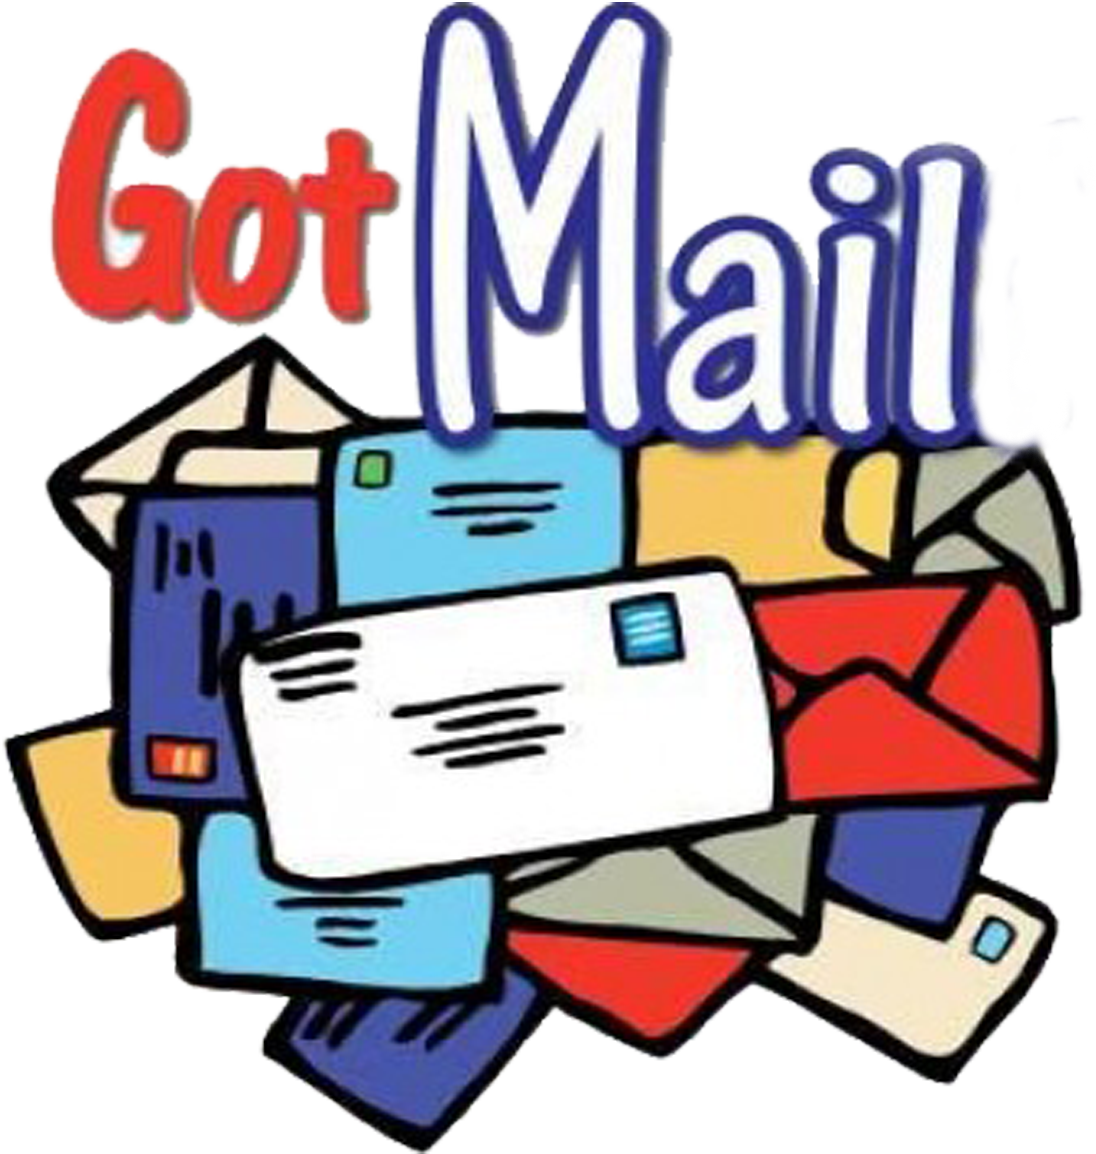 email bán lẻ